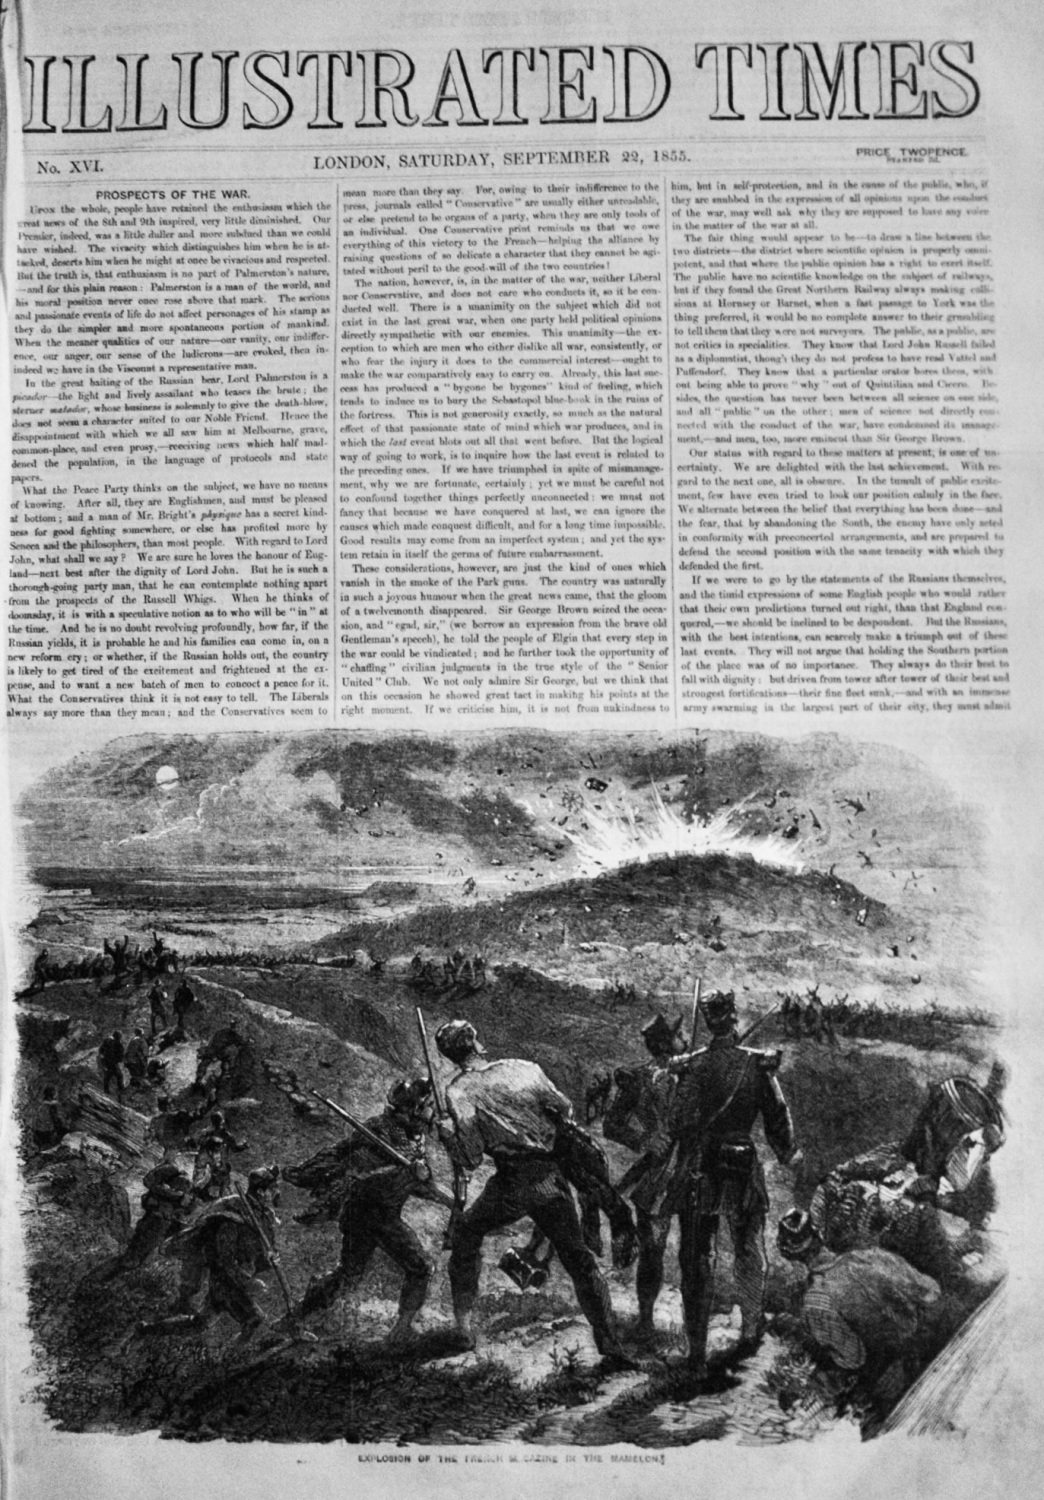 Illustrated Times, September 22nd, 1855.